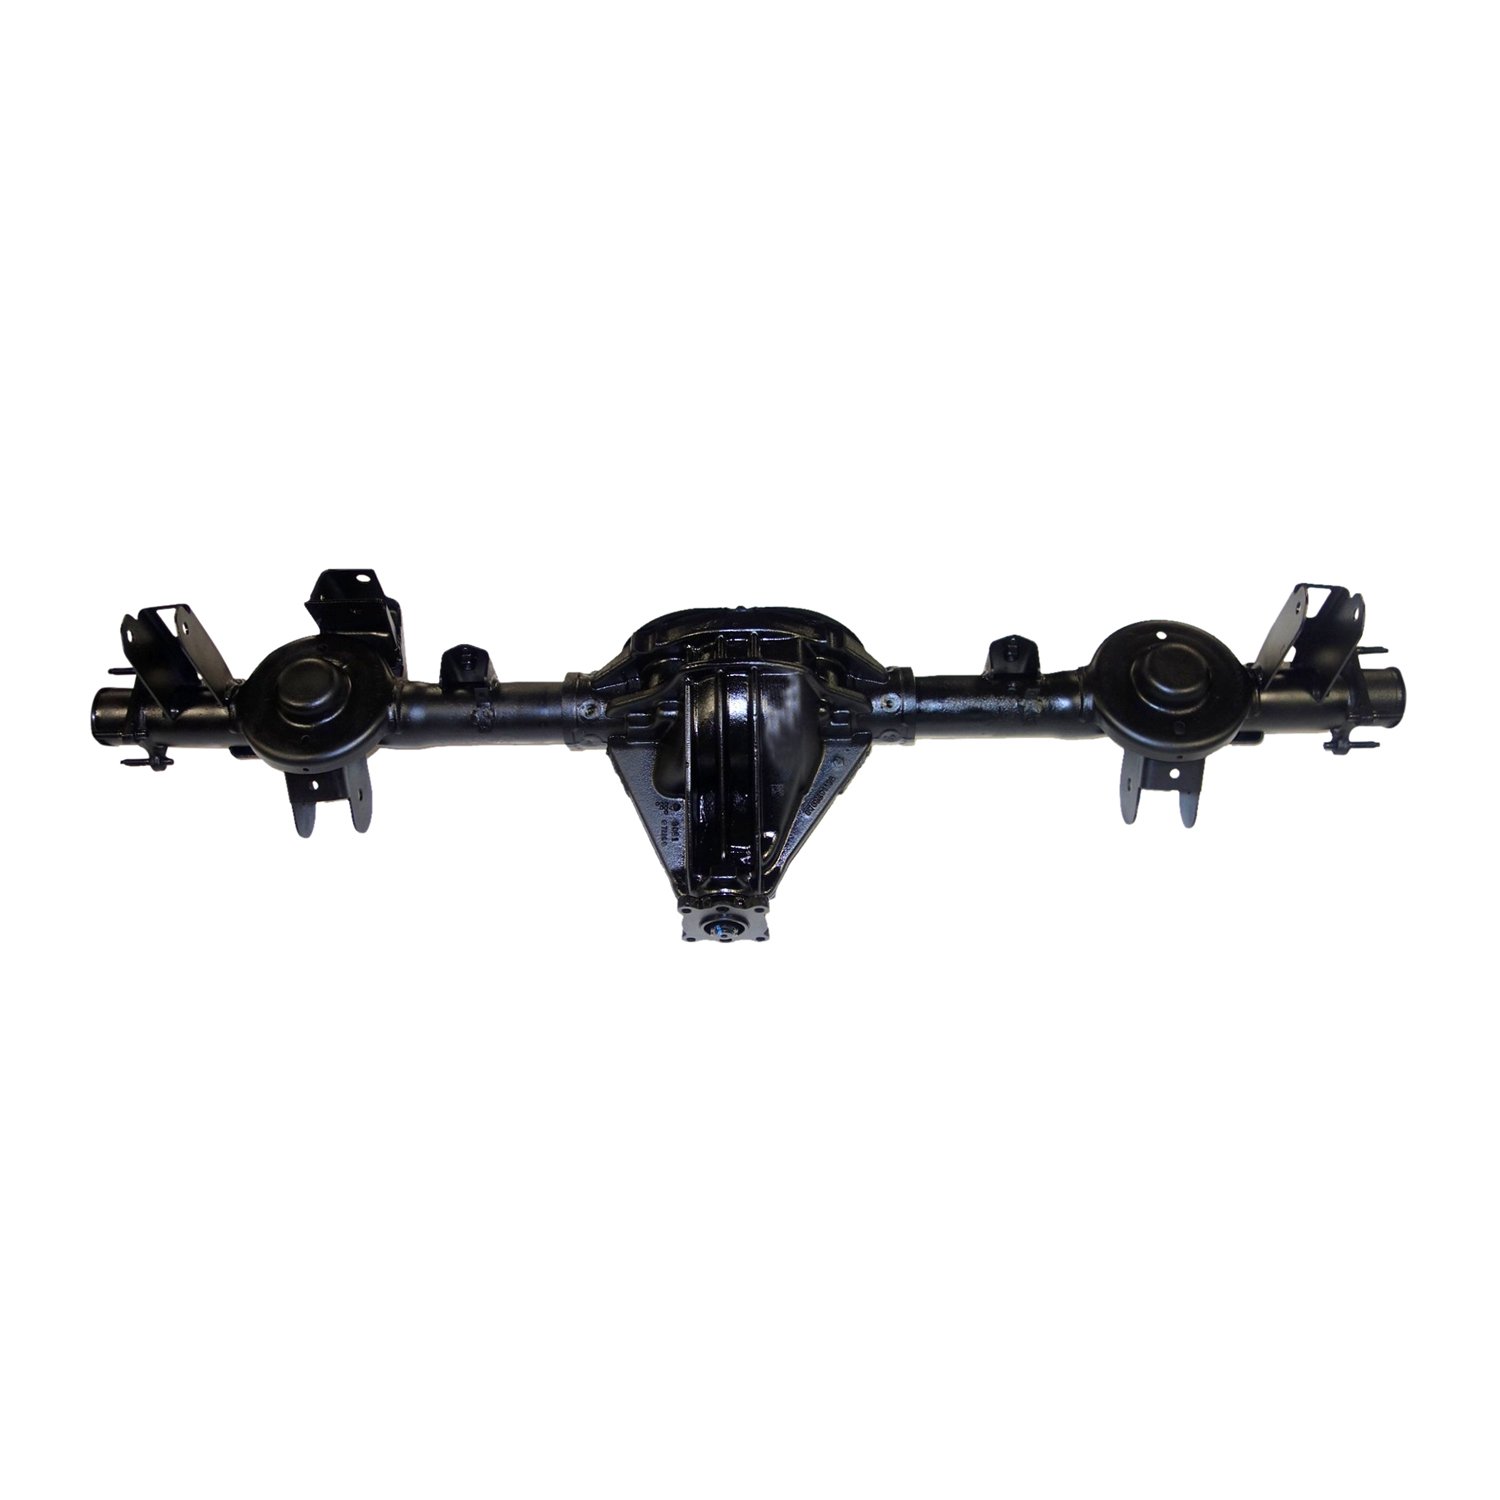 Remanufactured Axle Assembly for Chy 8.25" 07-12 Nitro & Liberty 3.21 Posi LSD